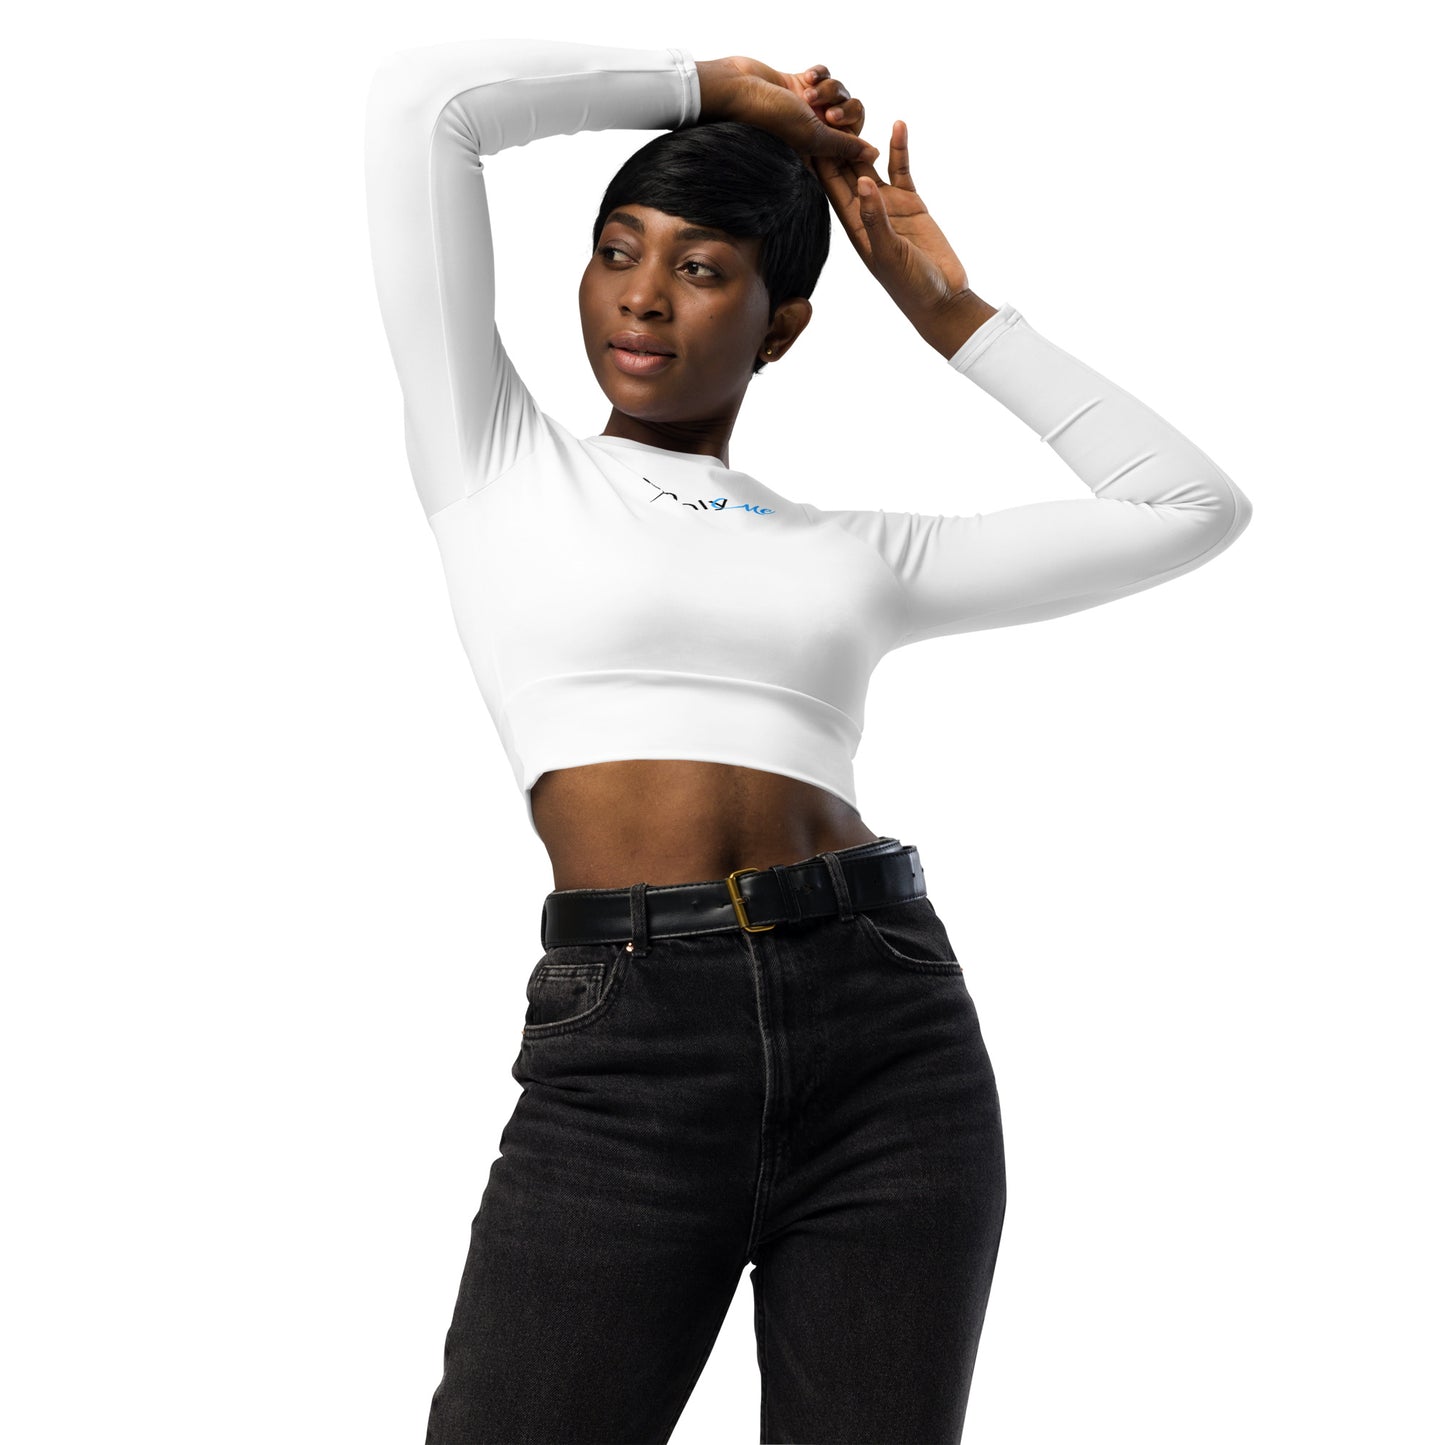 Only me long-sleeve crop top